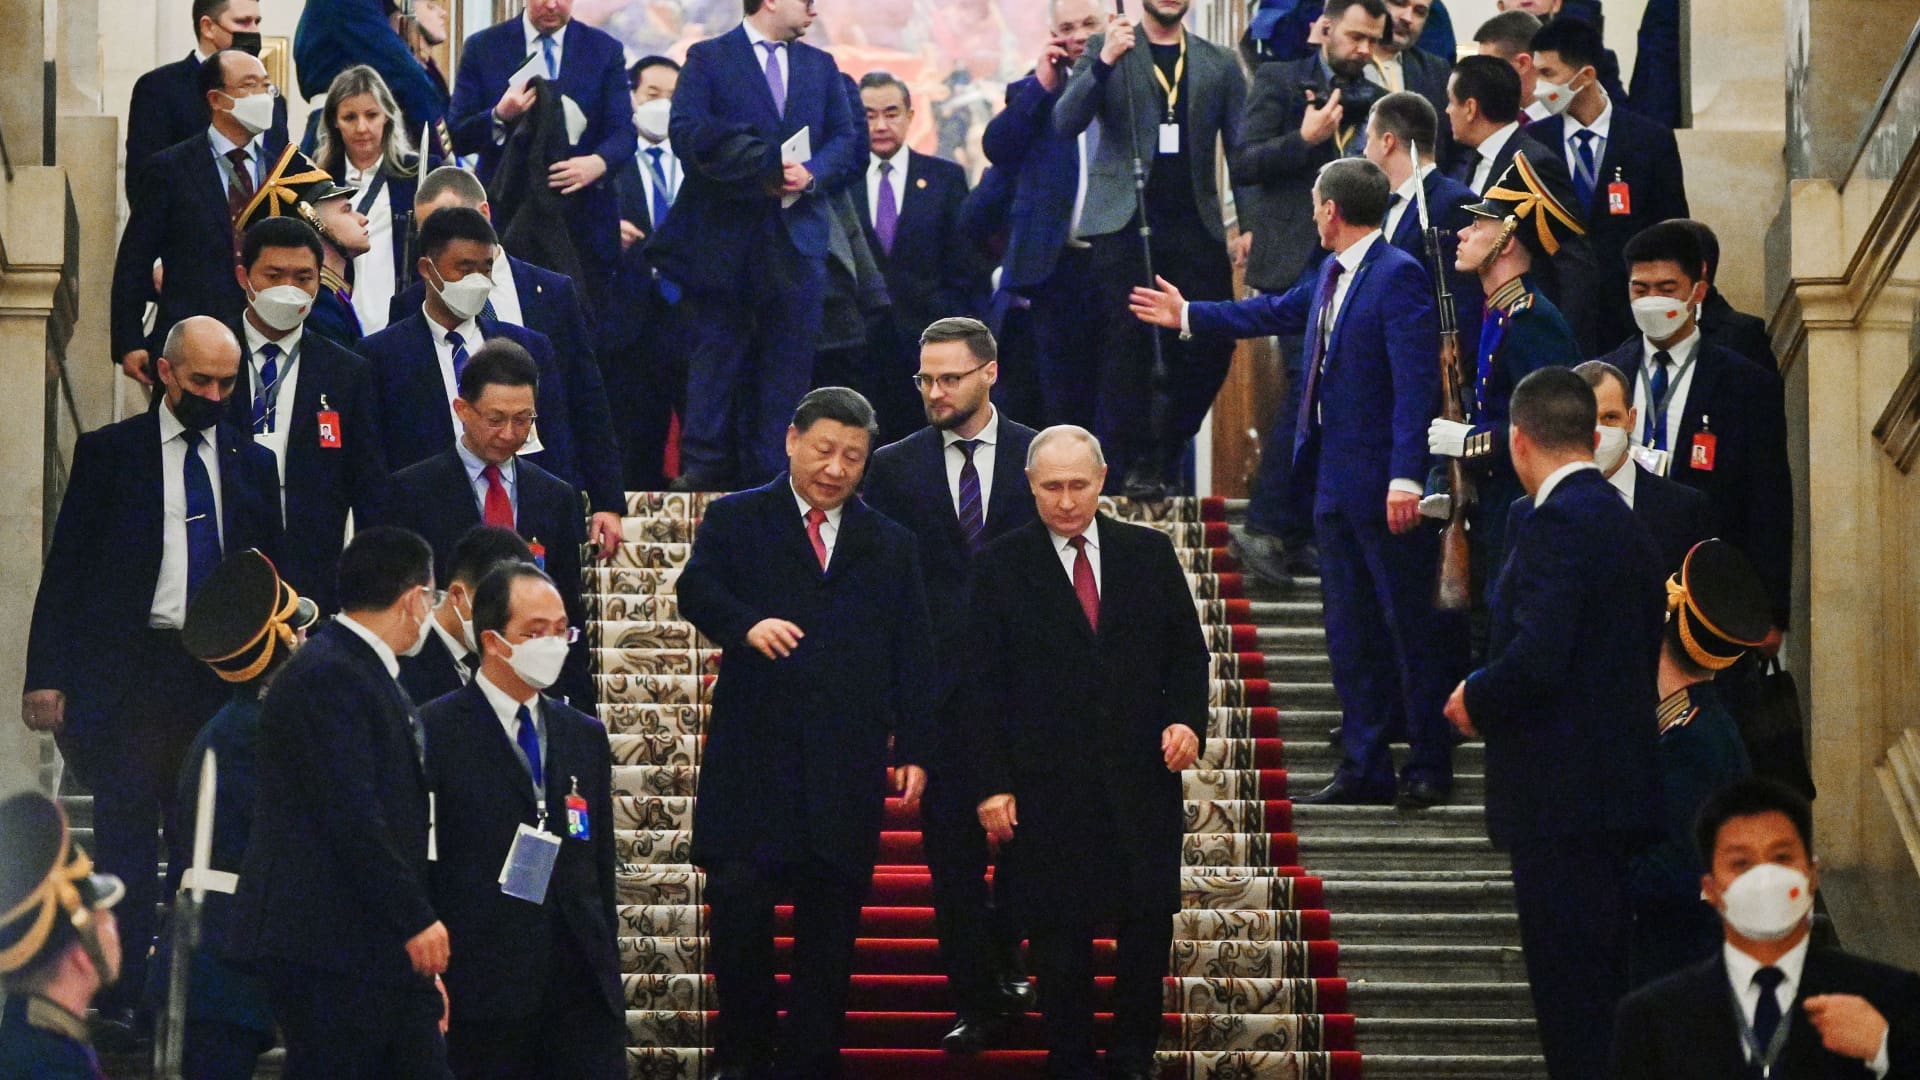 As Putin and Xi meet, the power dynamics between Russia and China keep the West guessing